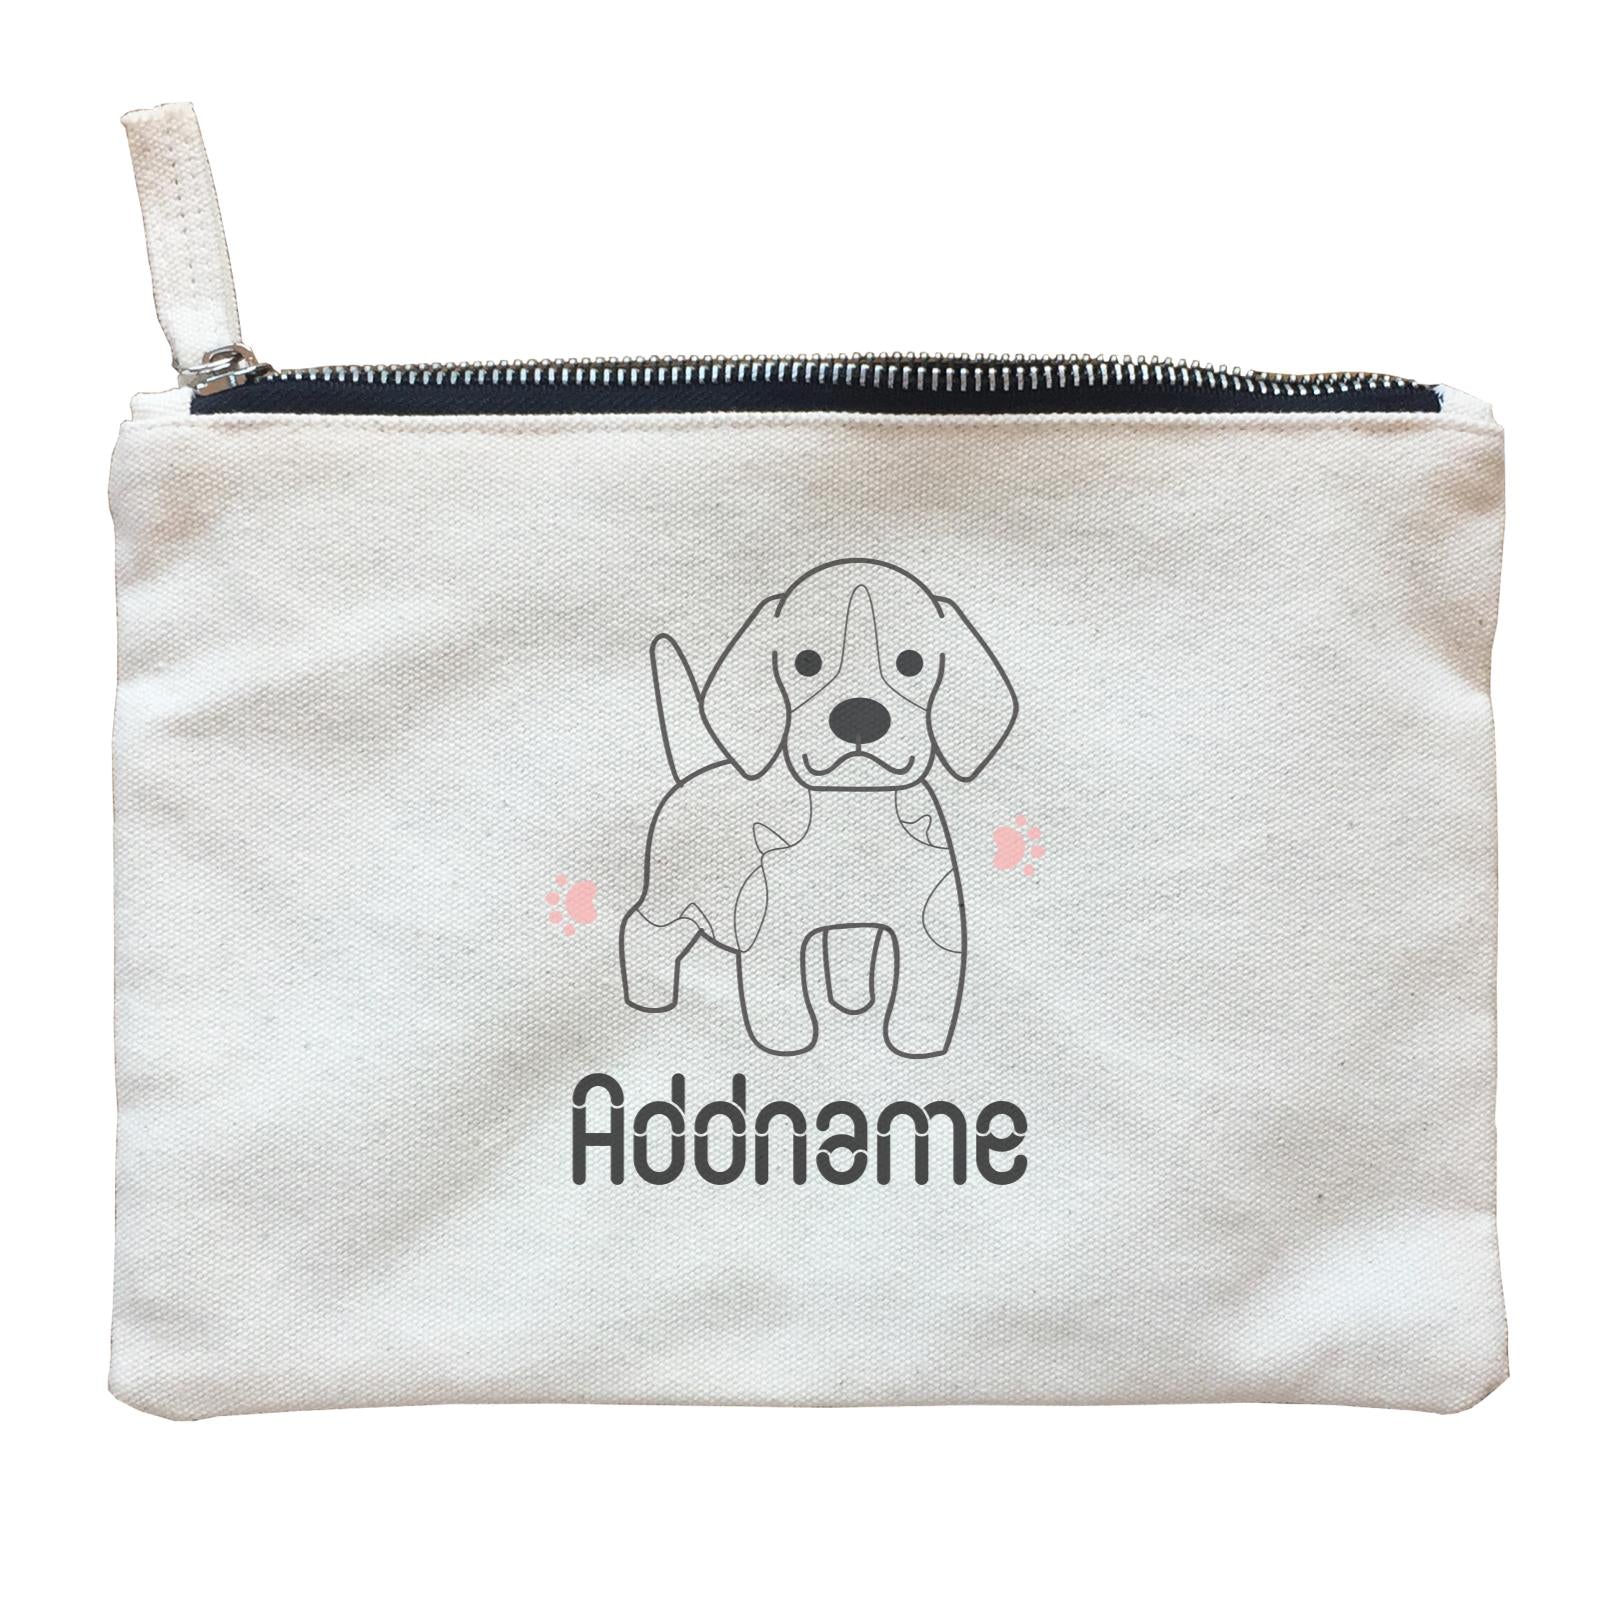 Coloring Outline Cute Hand Drawn Animals Dogs Beagle Addname Zipper Pouch